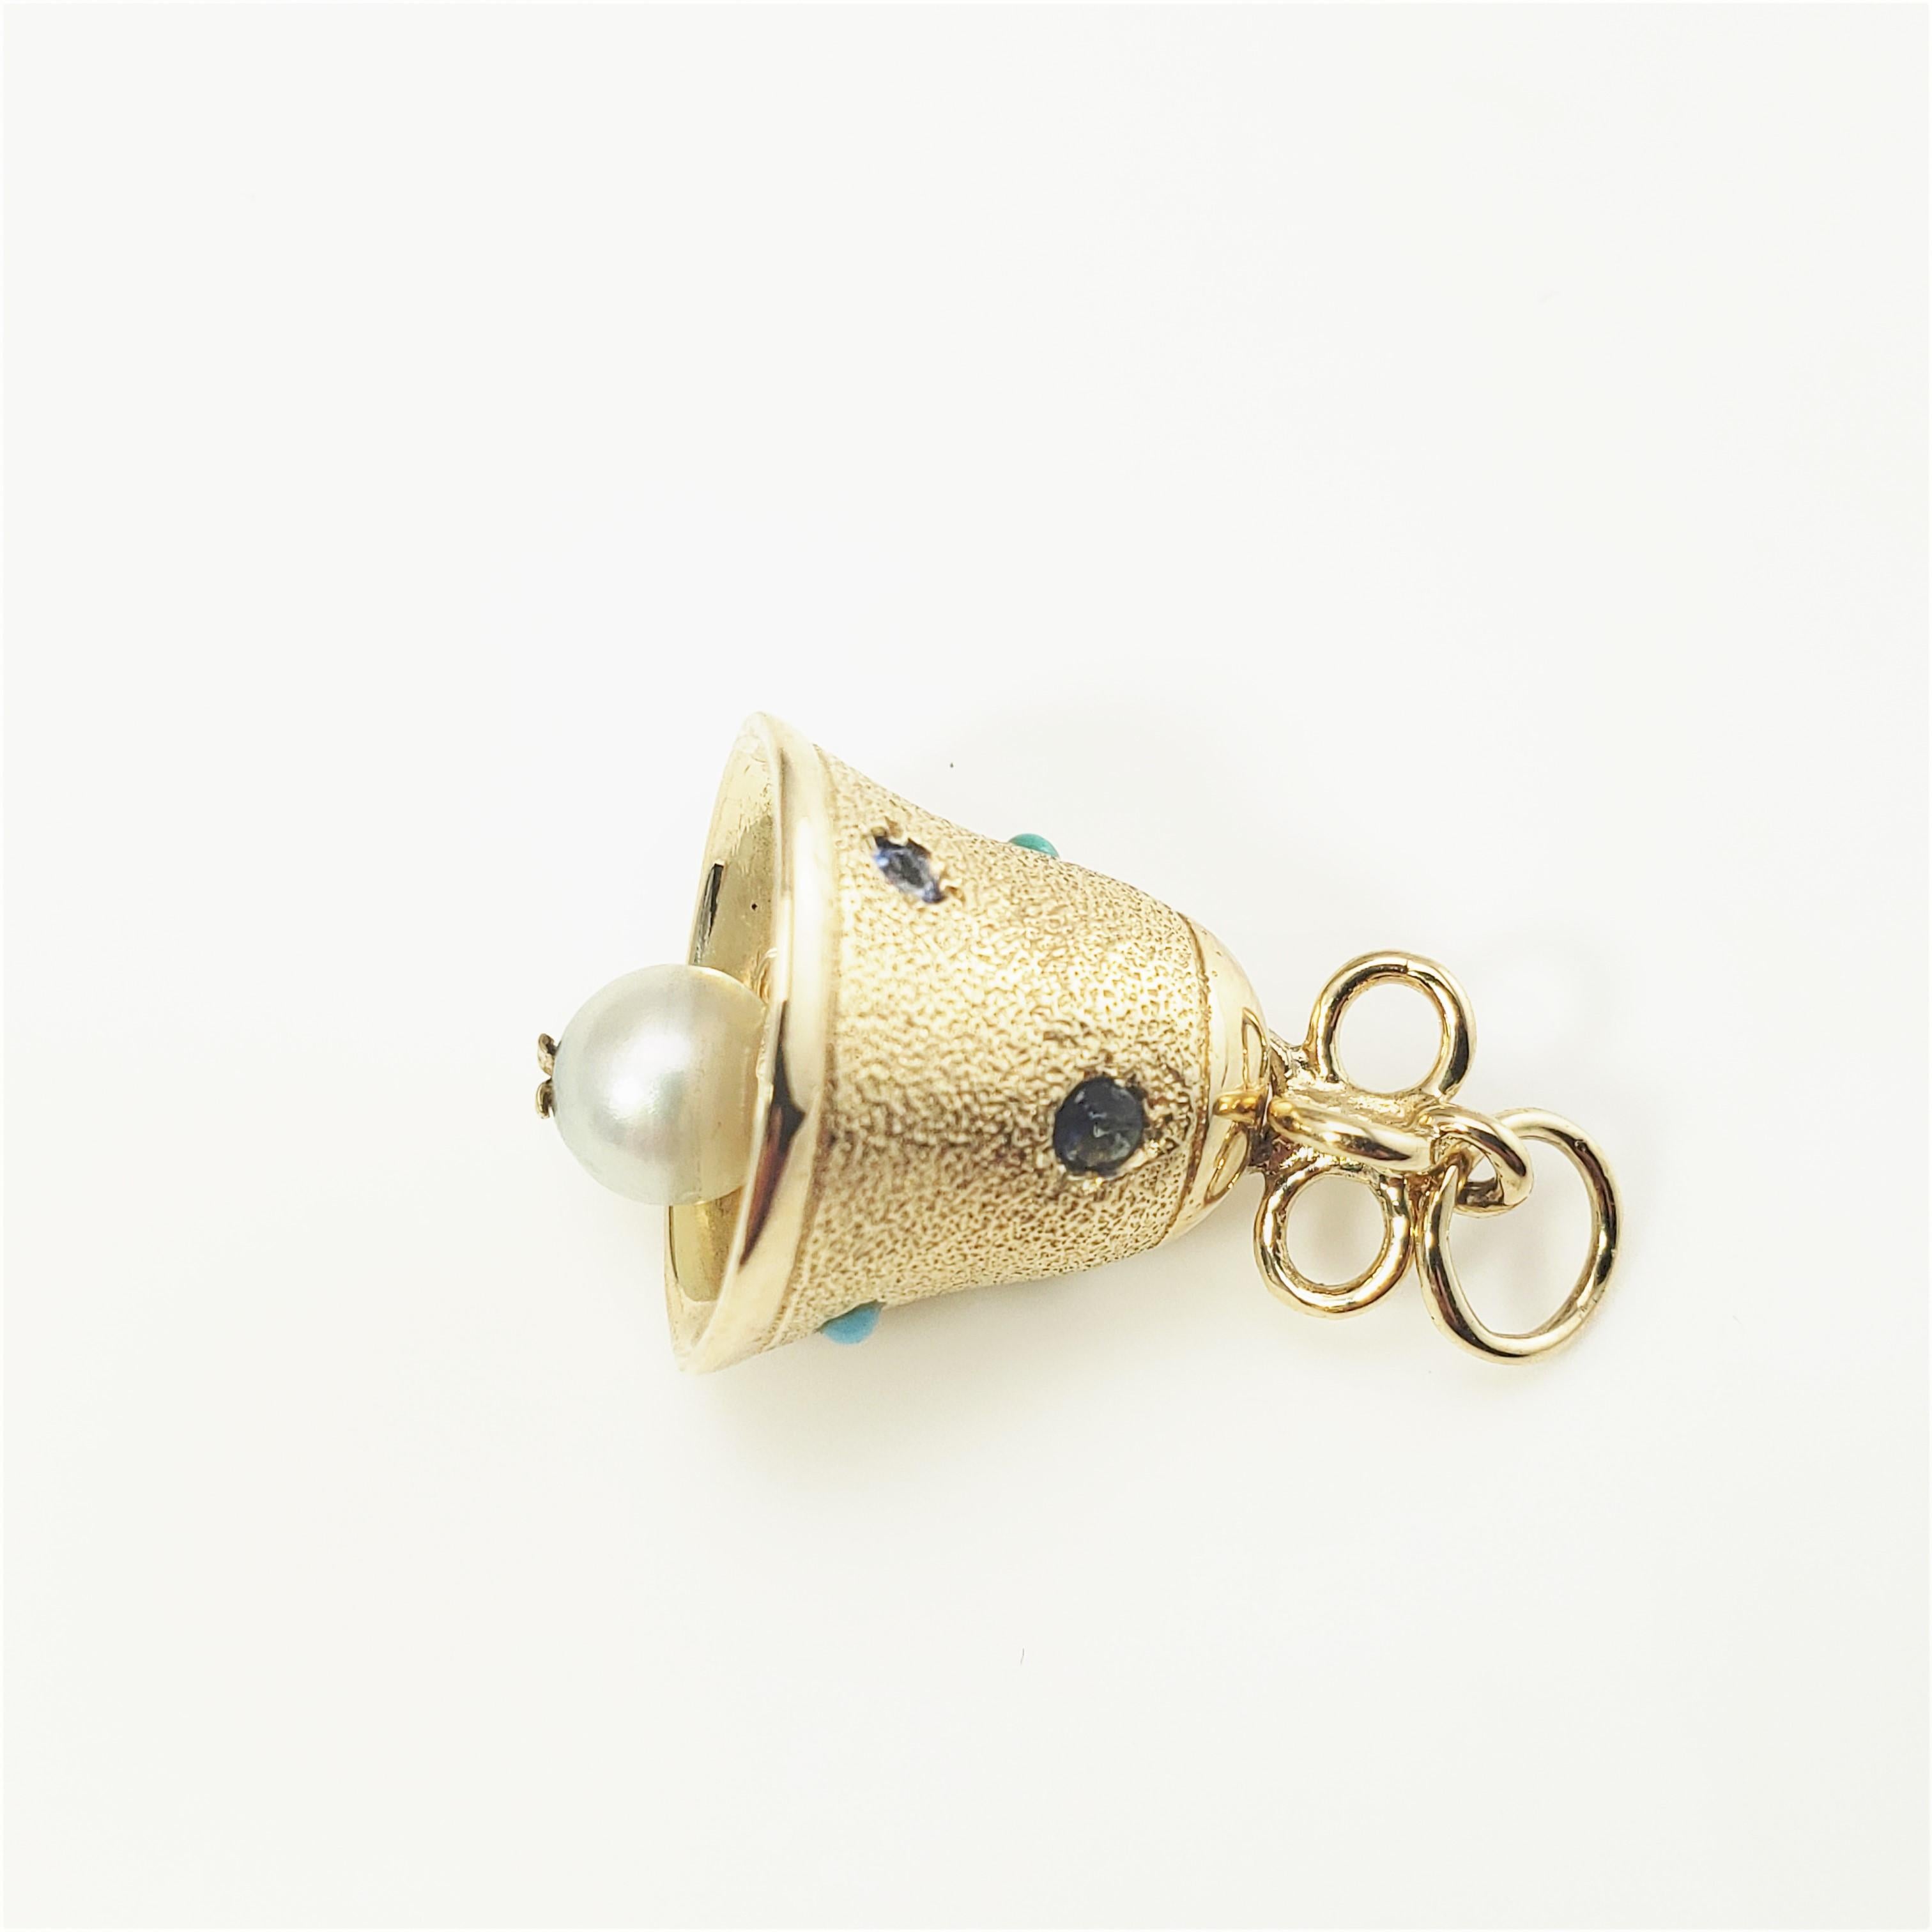 14 Karat Yellow Gold Bell Charm-

This lovely 3D charm features a miniature bell accented with three sapphires, two turquoise stones, and one pearl (6 mm) crafted in beautifully detailed 14K yellow gold.

Size:  18 mm x 15 mm (actual charm)

Weight: